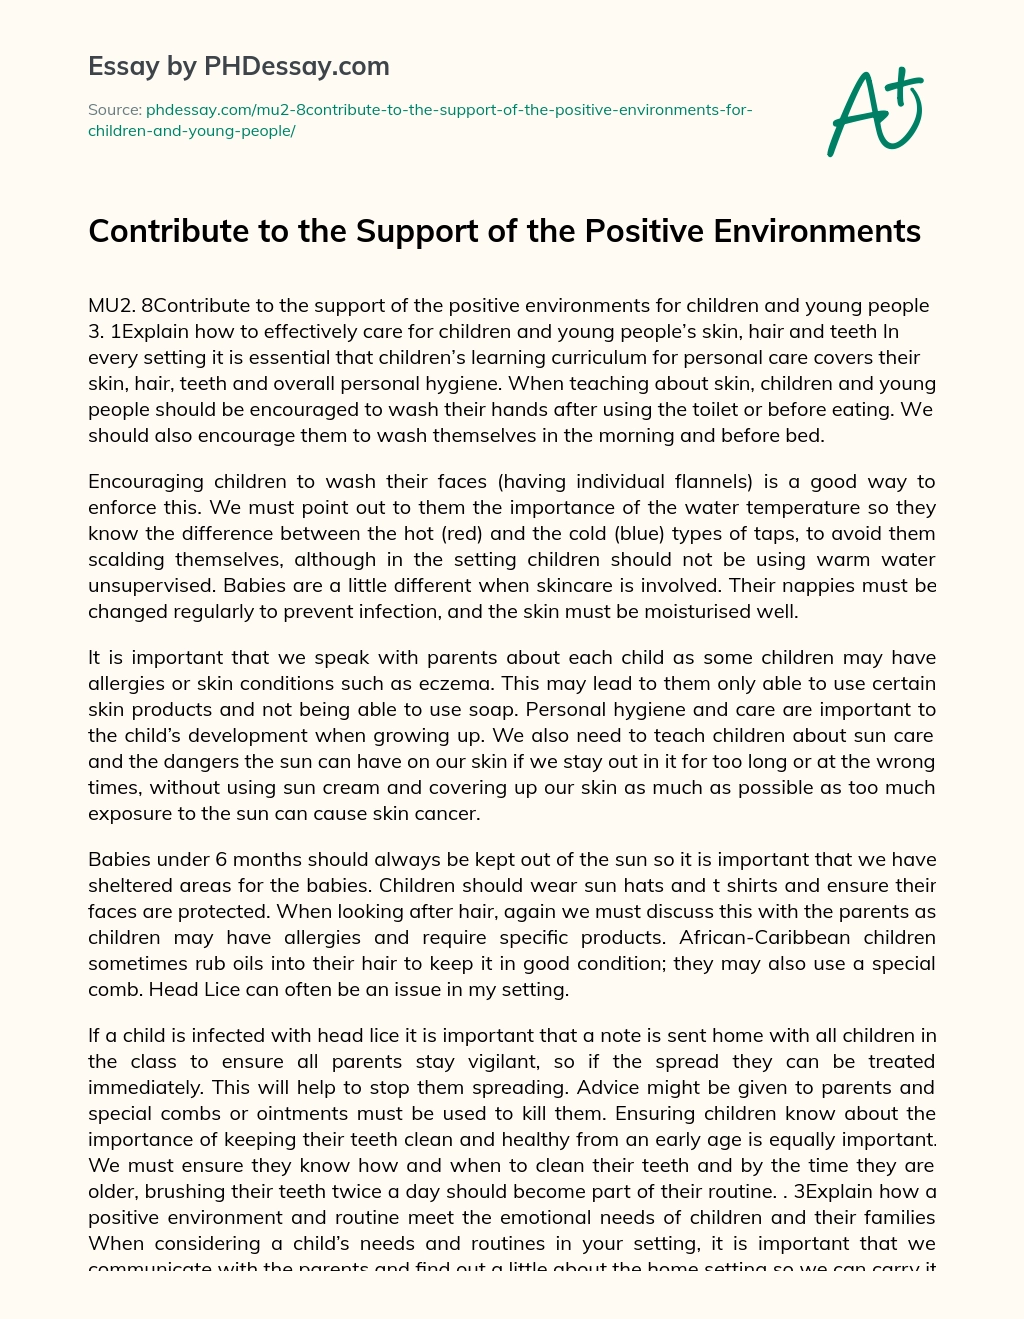 Contribute to the Support of the Positive Environments essay